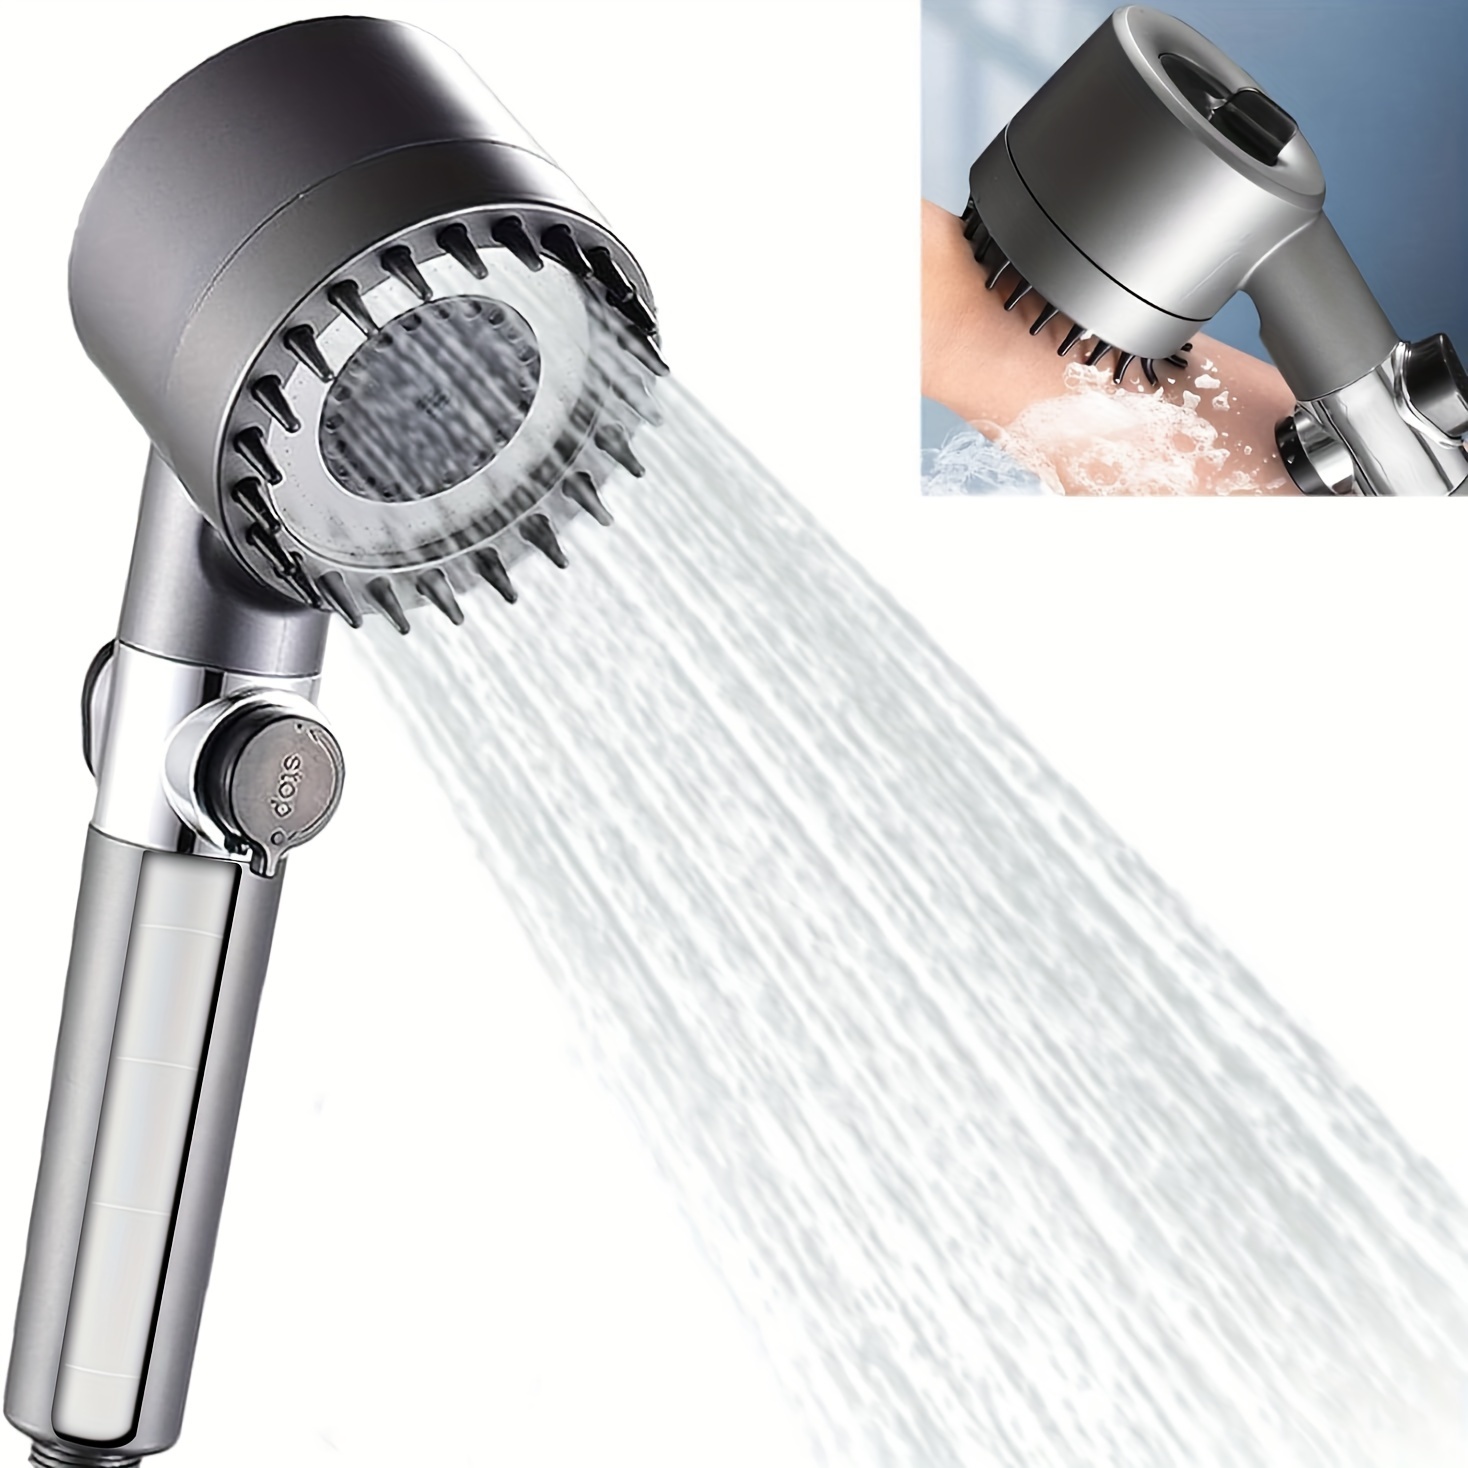 

1pc Filtered Shower Head, Power Wash For Hard Water, High Pressure Water Flow And Multiple Spray Modes Shower Head, Showerhead With On/off Switch For Pets Bath